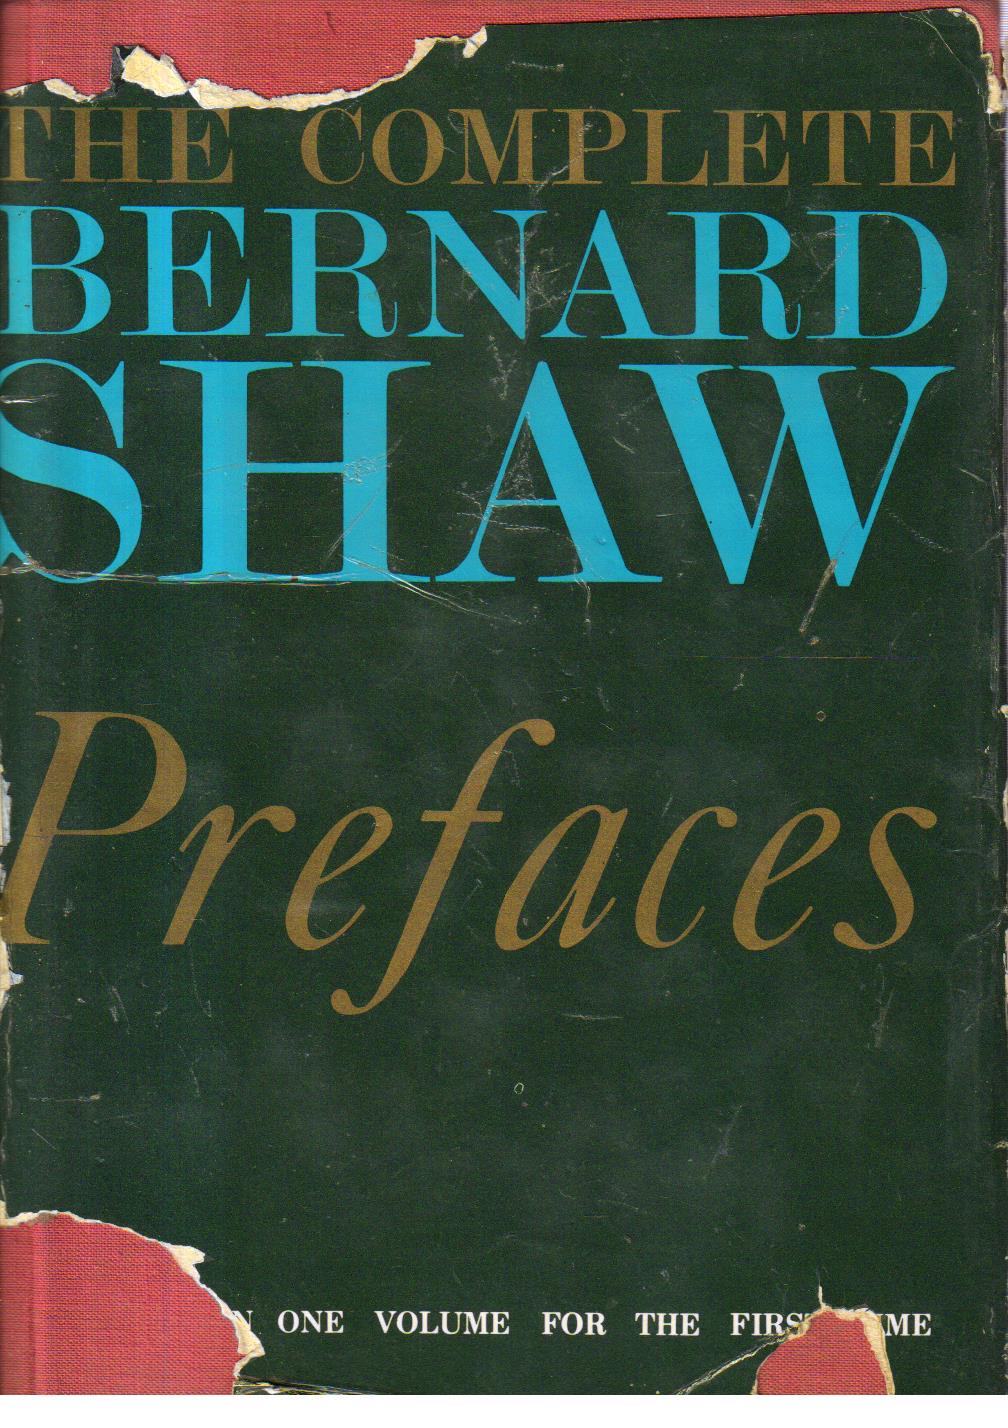 The Complete Prefaces of Bernard Shaw.